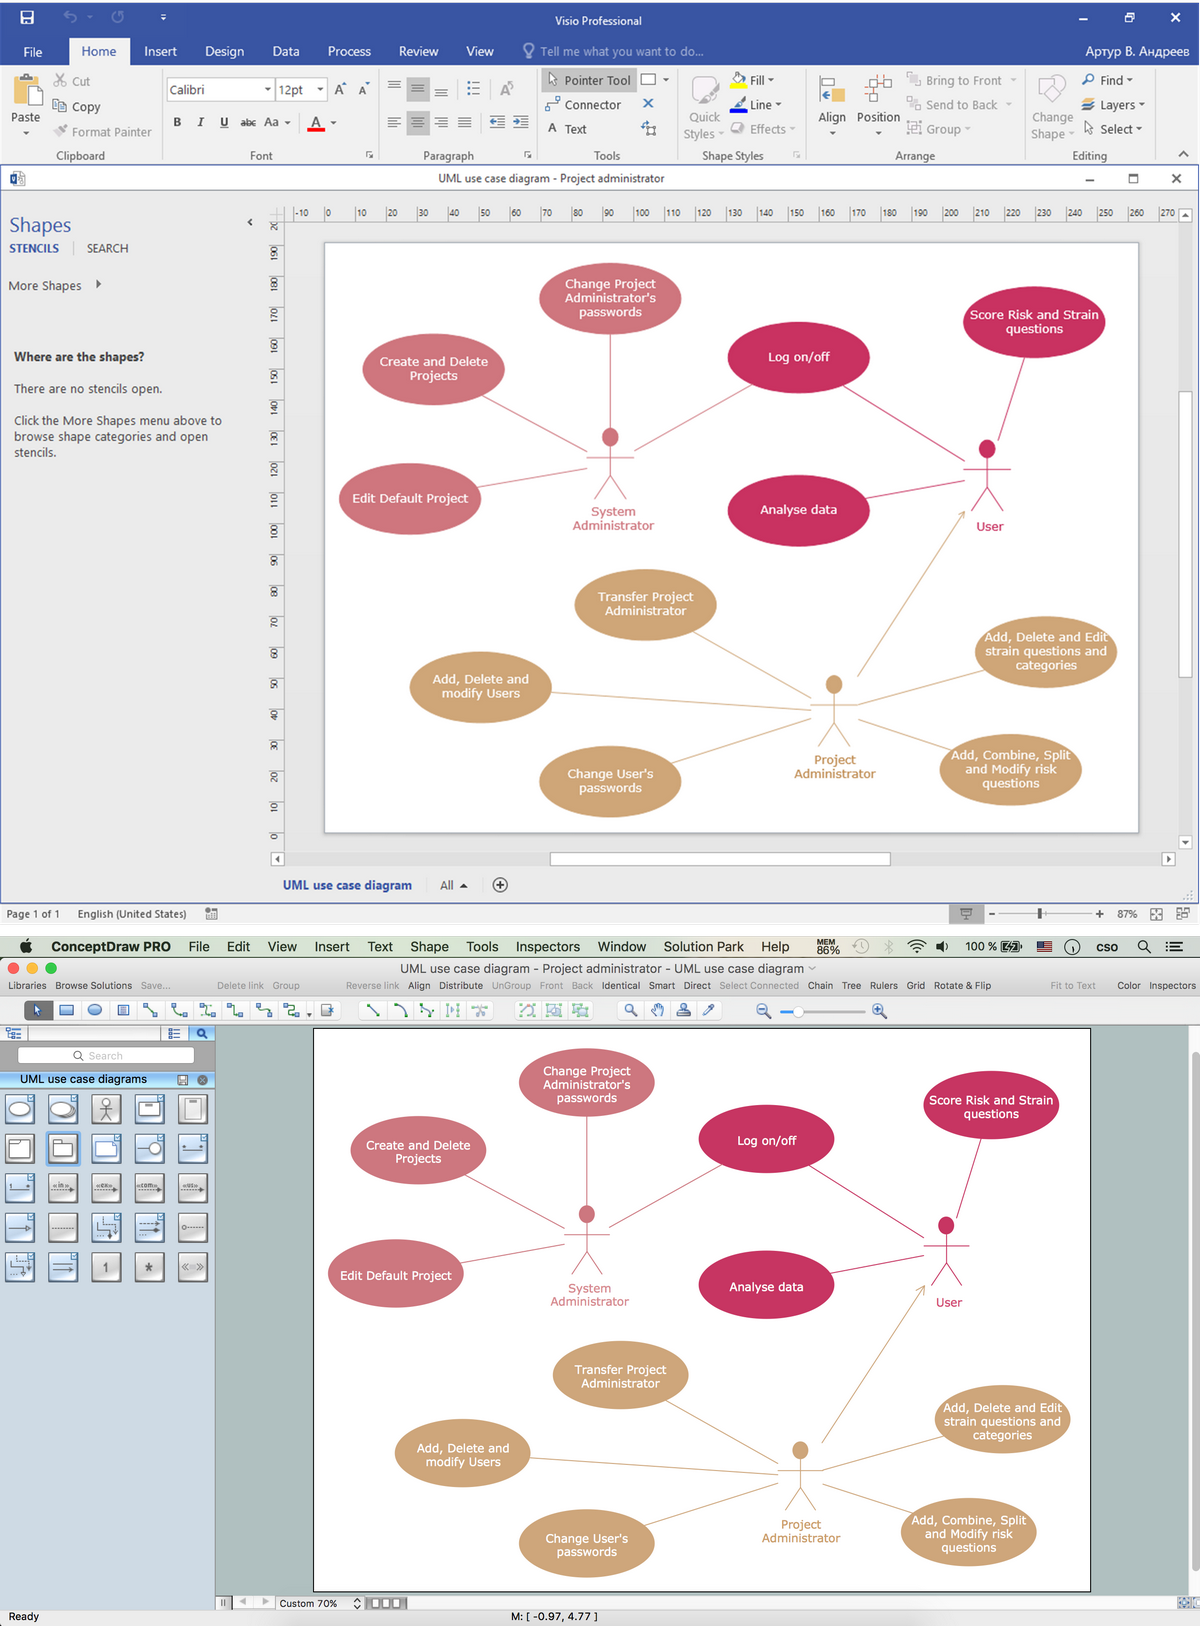 Visio Files and ConceptDraw *